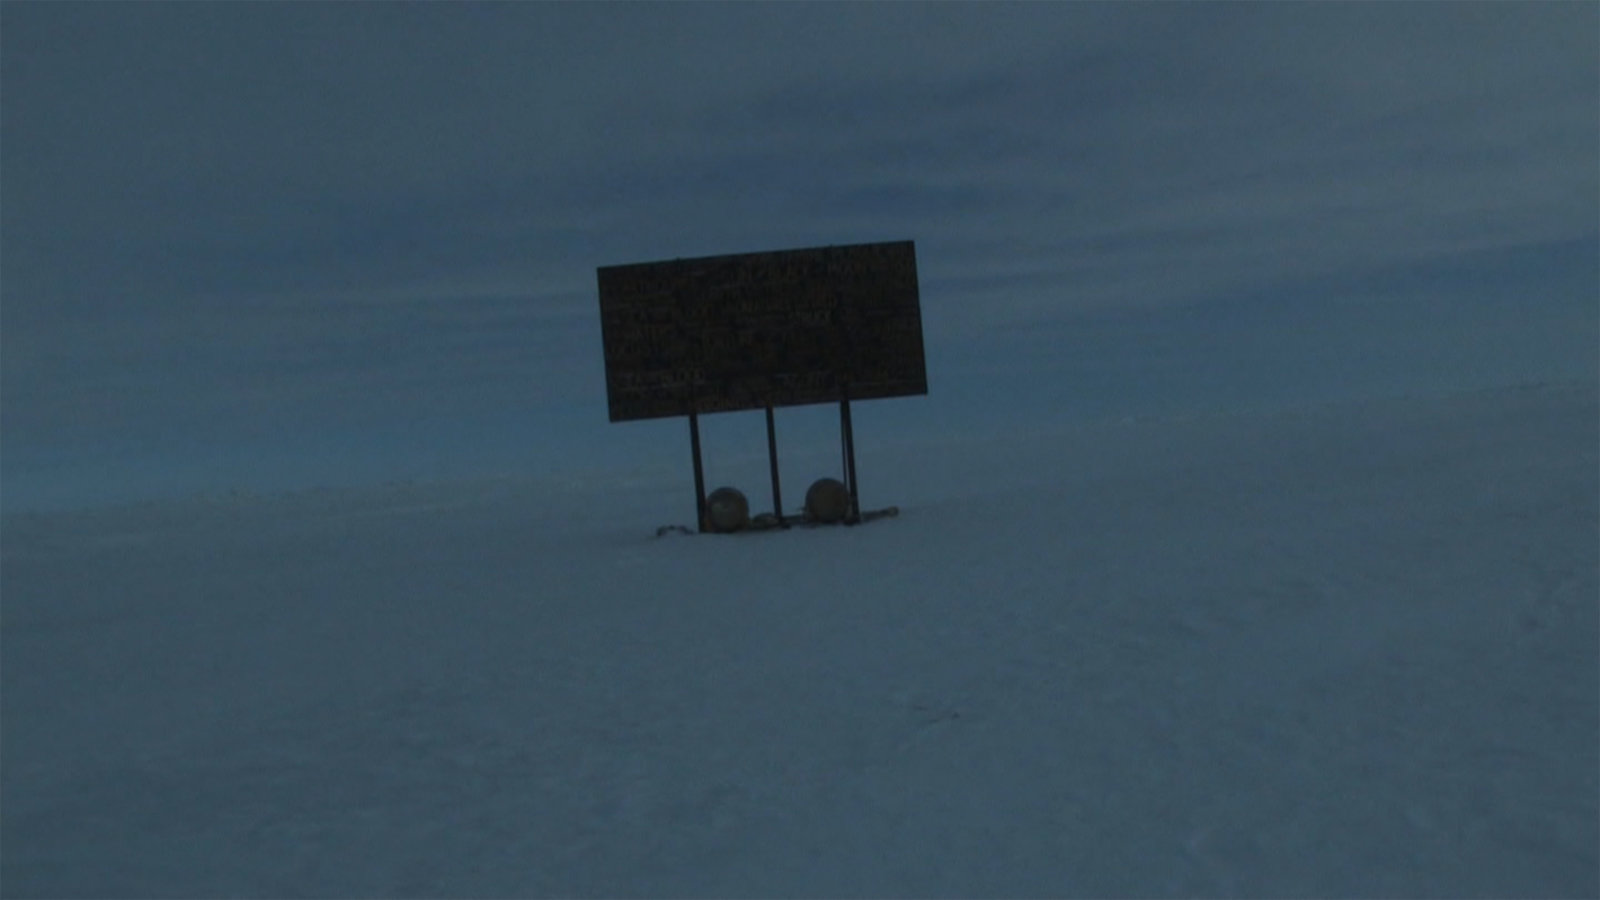 Kevin Schmidt, A Sign in the Northwest Passage (Video) (still), 2012, HD video, 12 minutes, 30 seconds